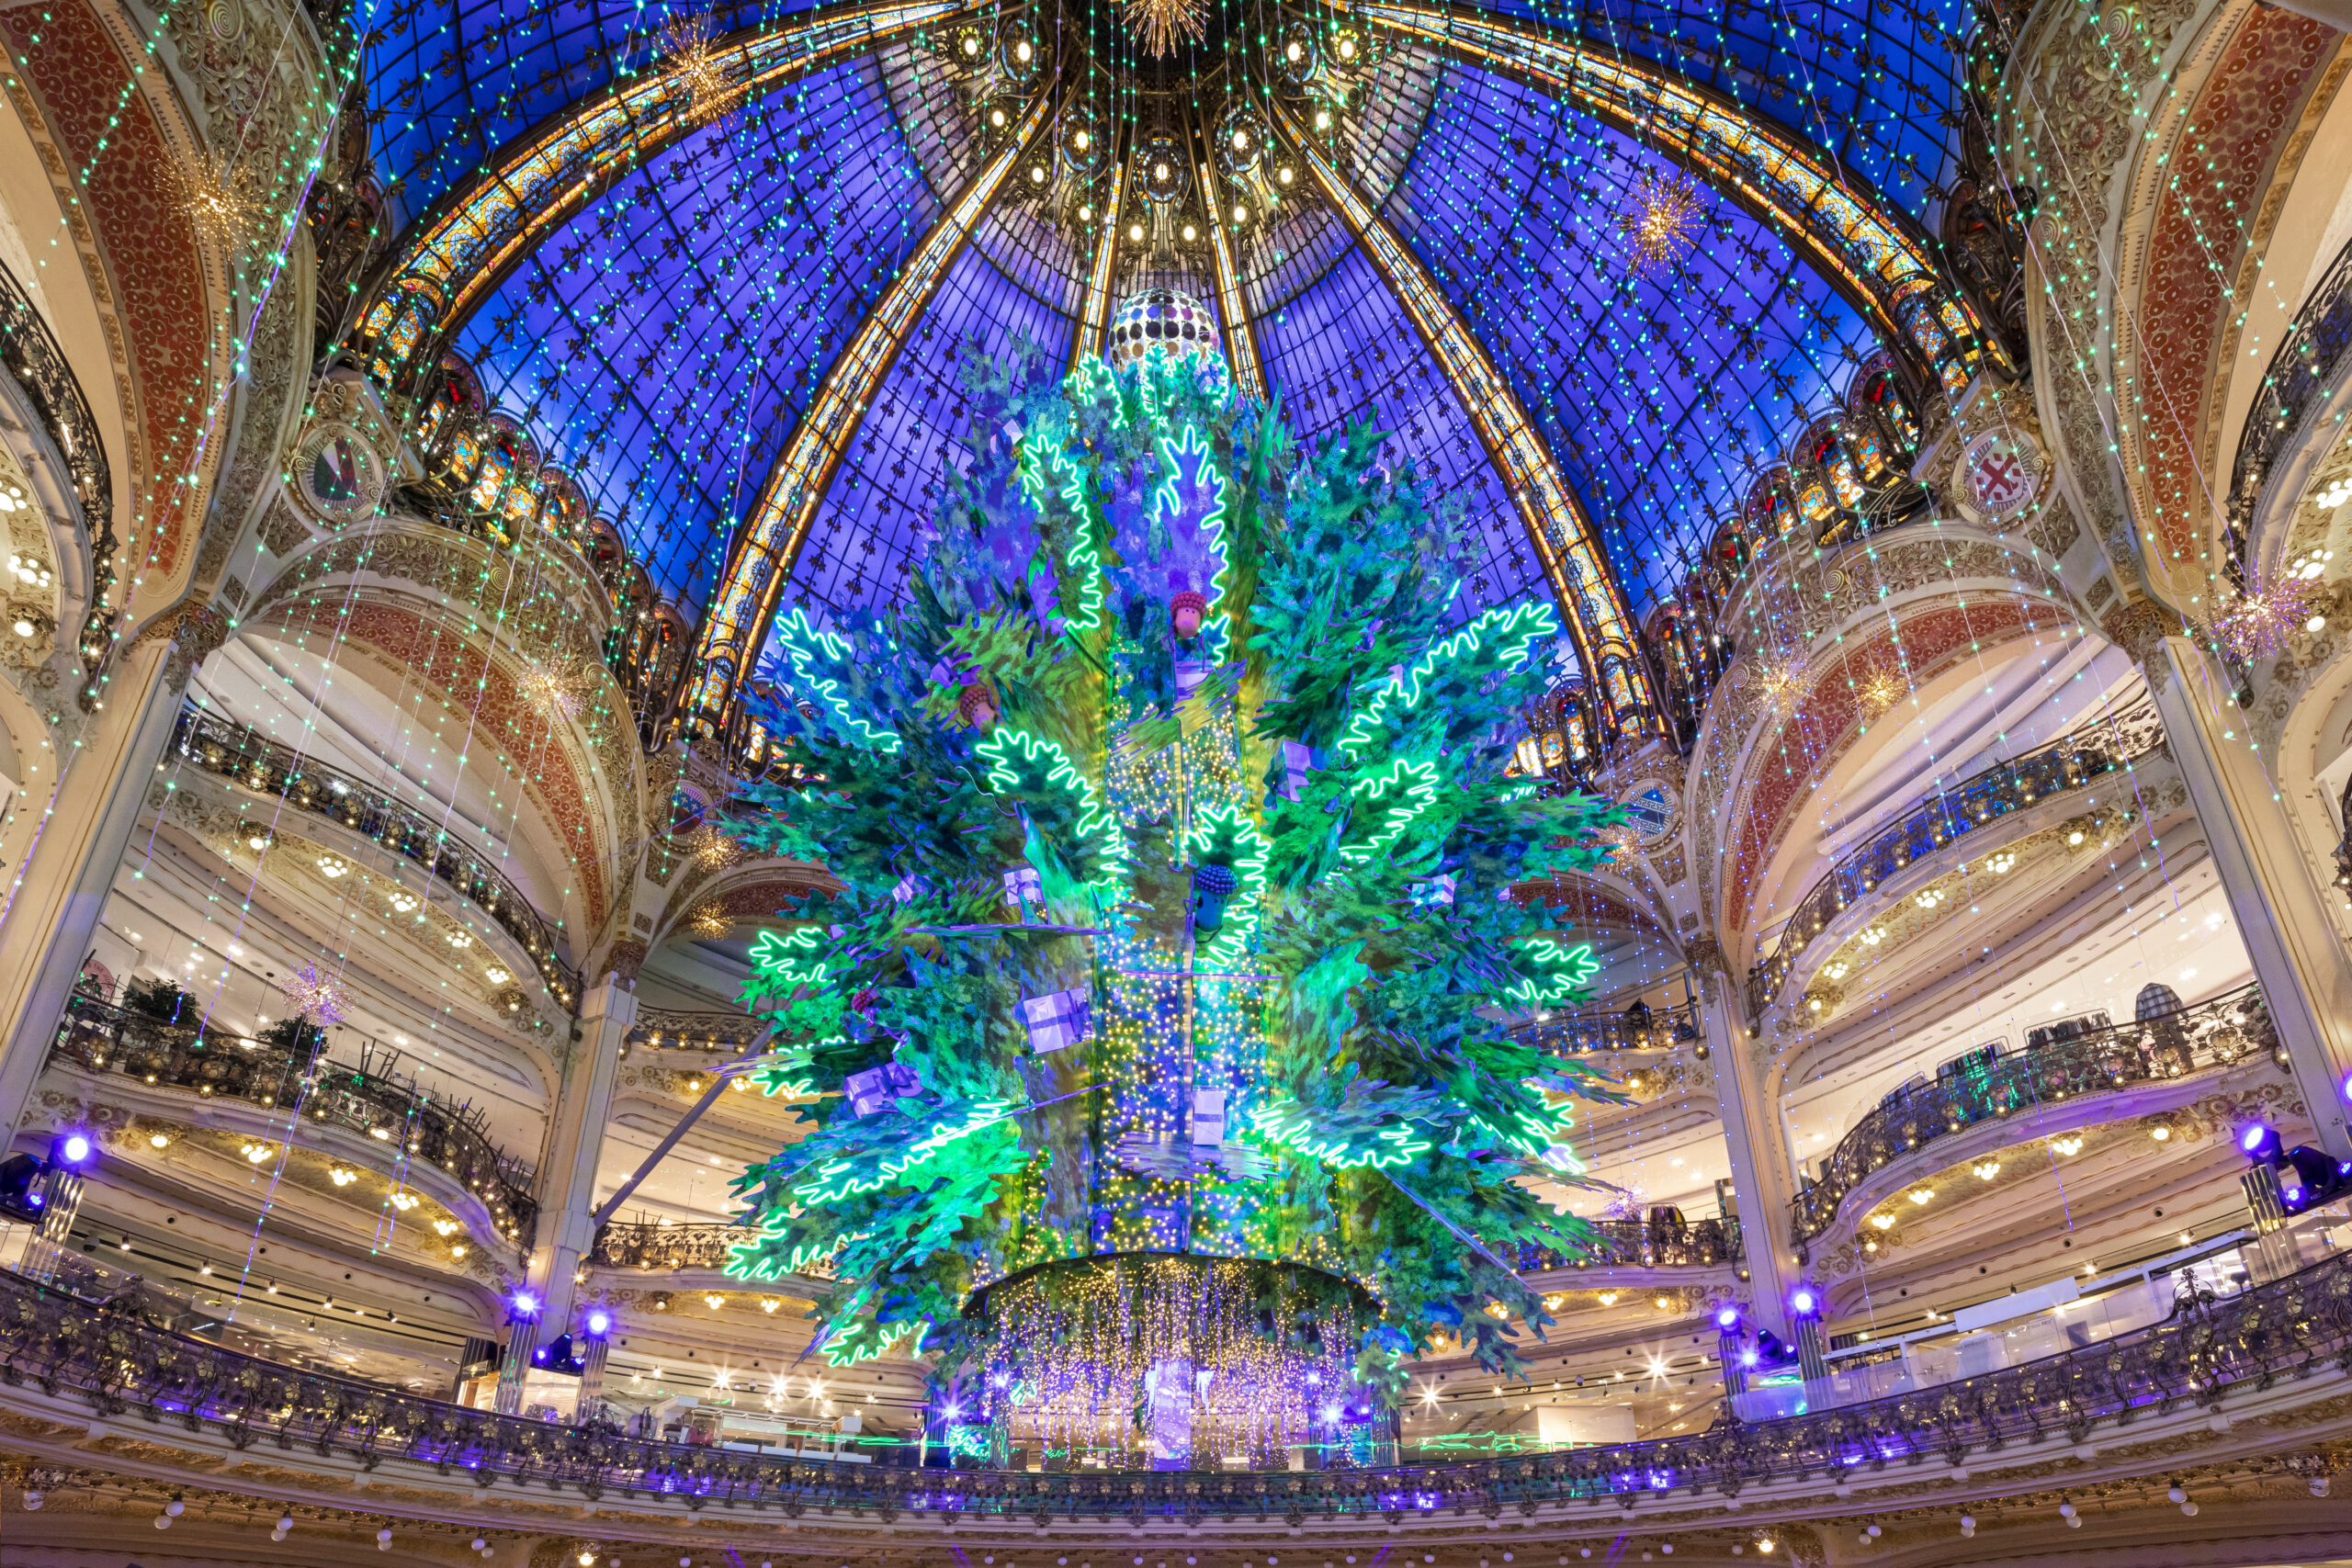 Galeries Lafayette Now Offers 'Paris Shopping Experience